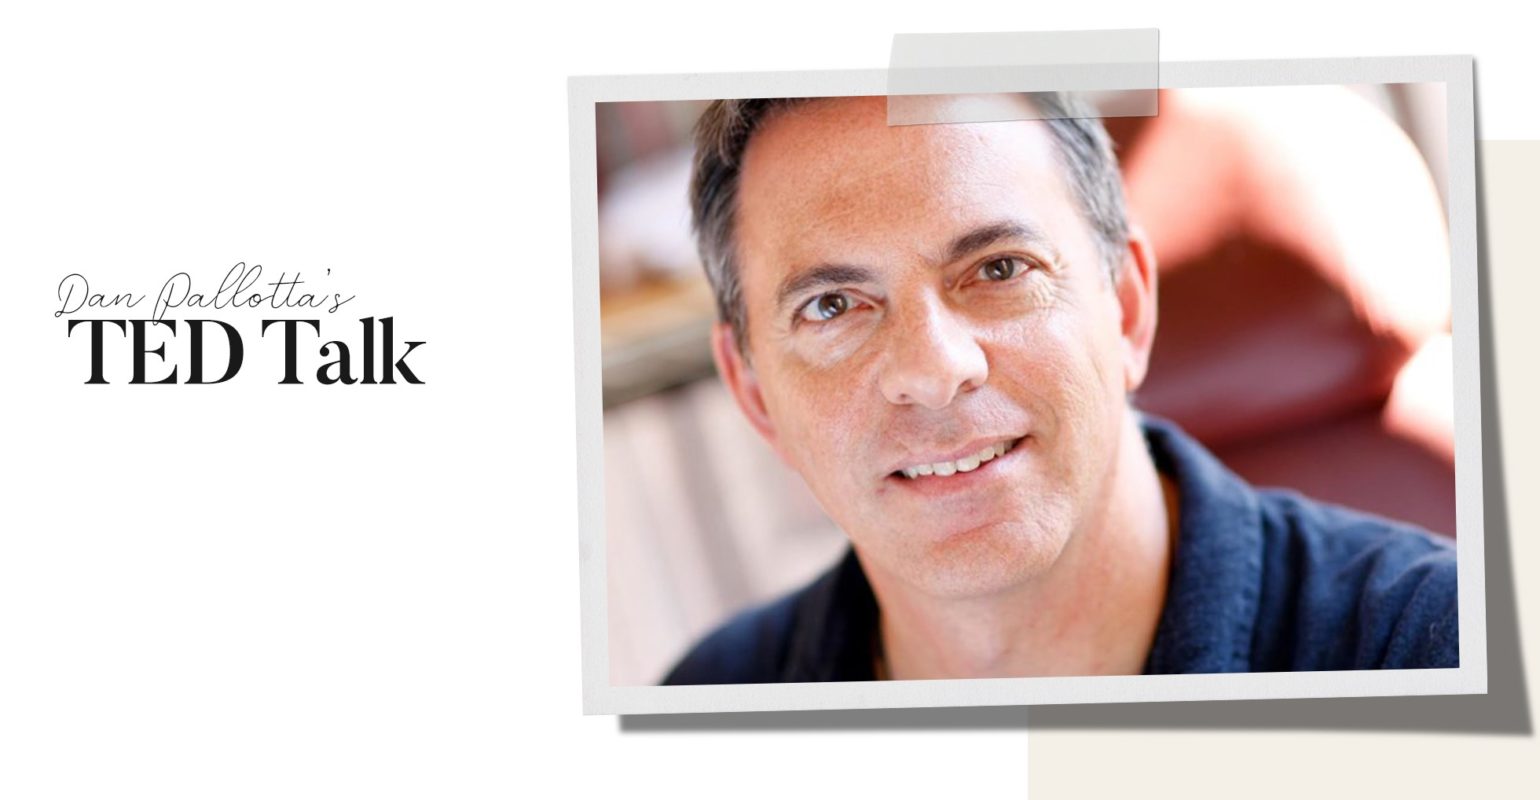 Dan Pallotta’s TED Talk: The Way We Think About Charity is Dead Wrong